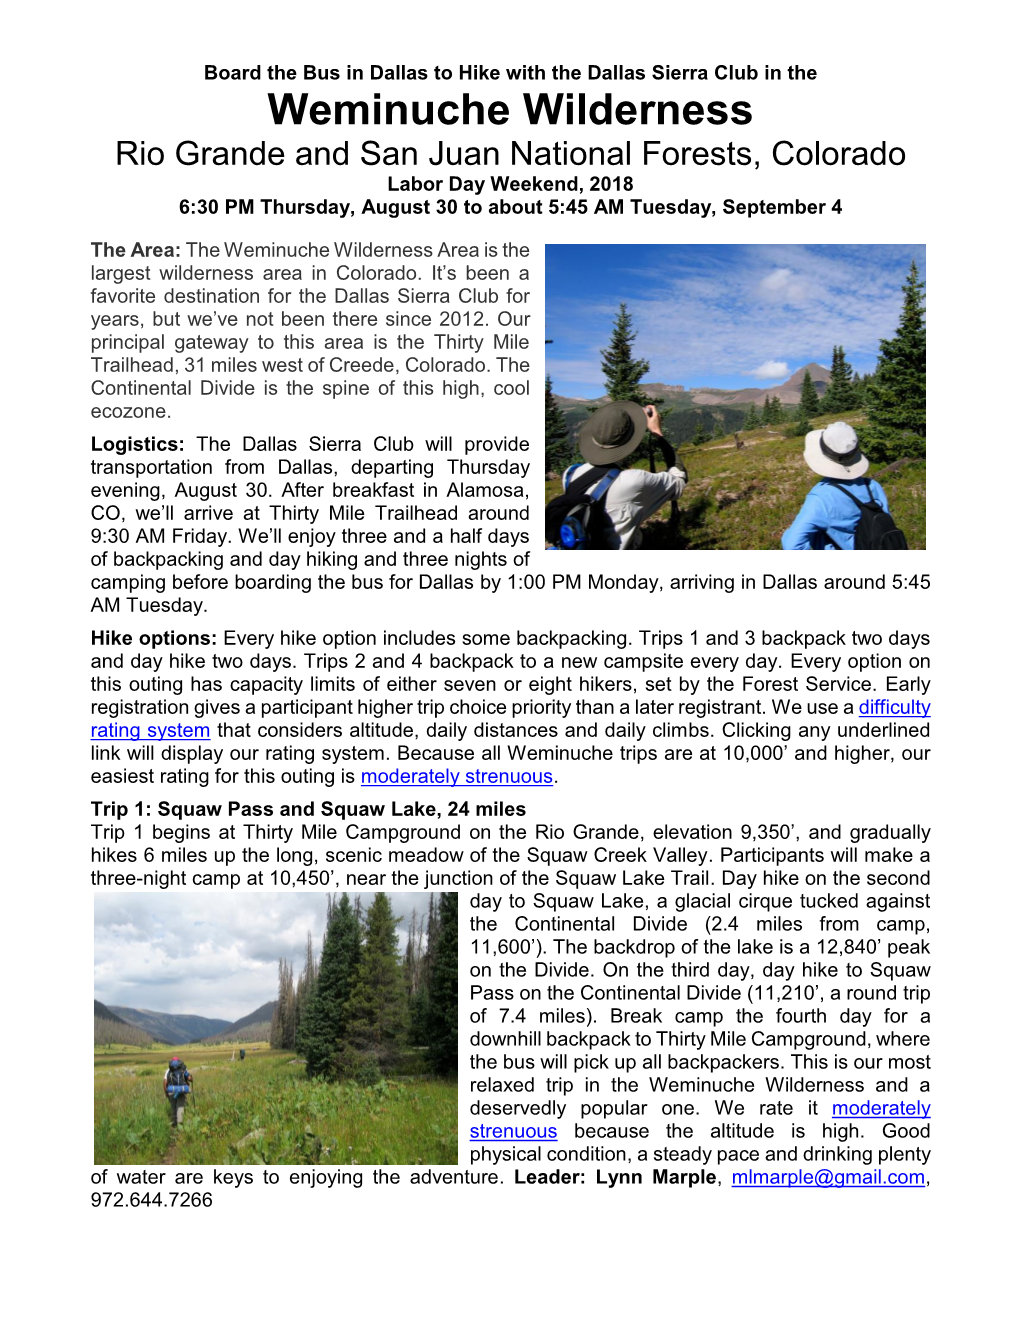 Weminuche Wilderness Rio Grande and San Juan National Forests, Colorado Labor Day Weekend, 2018 6:30 PM Thursday, August 30 to About 5:45 AM Tuesday, September 4